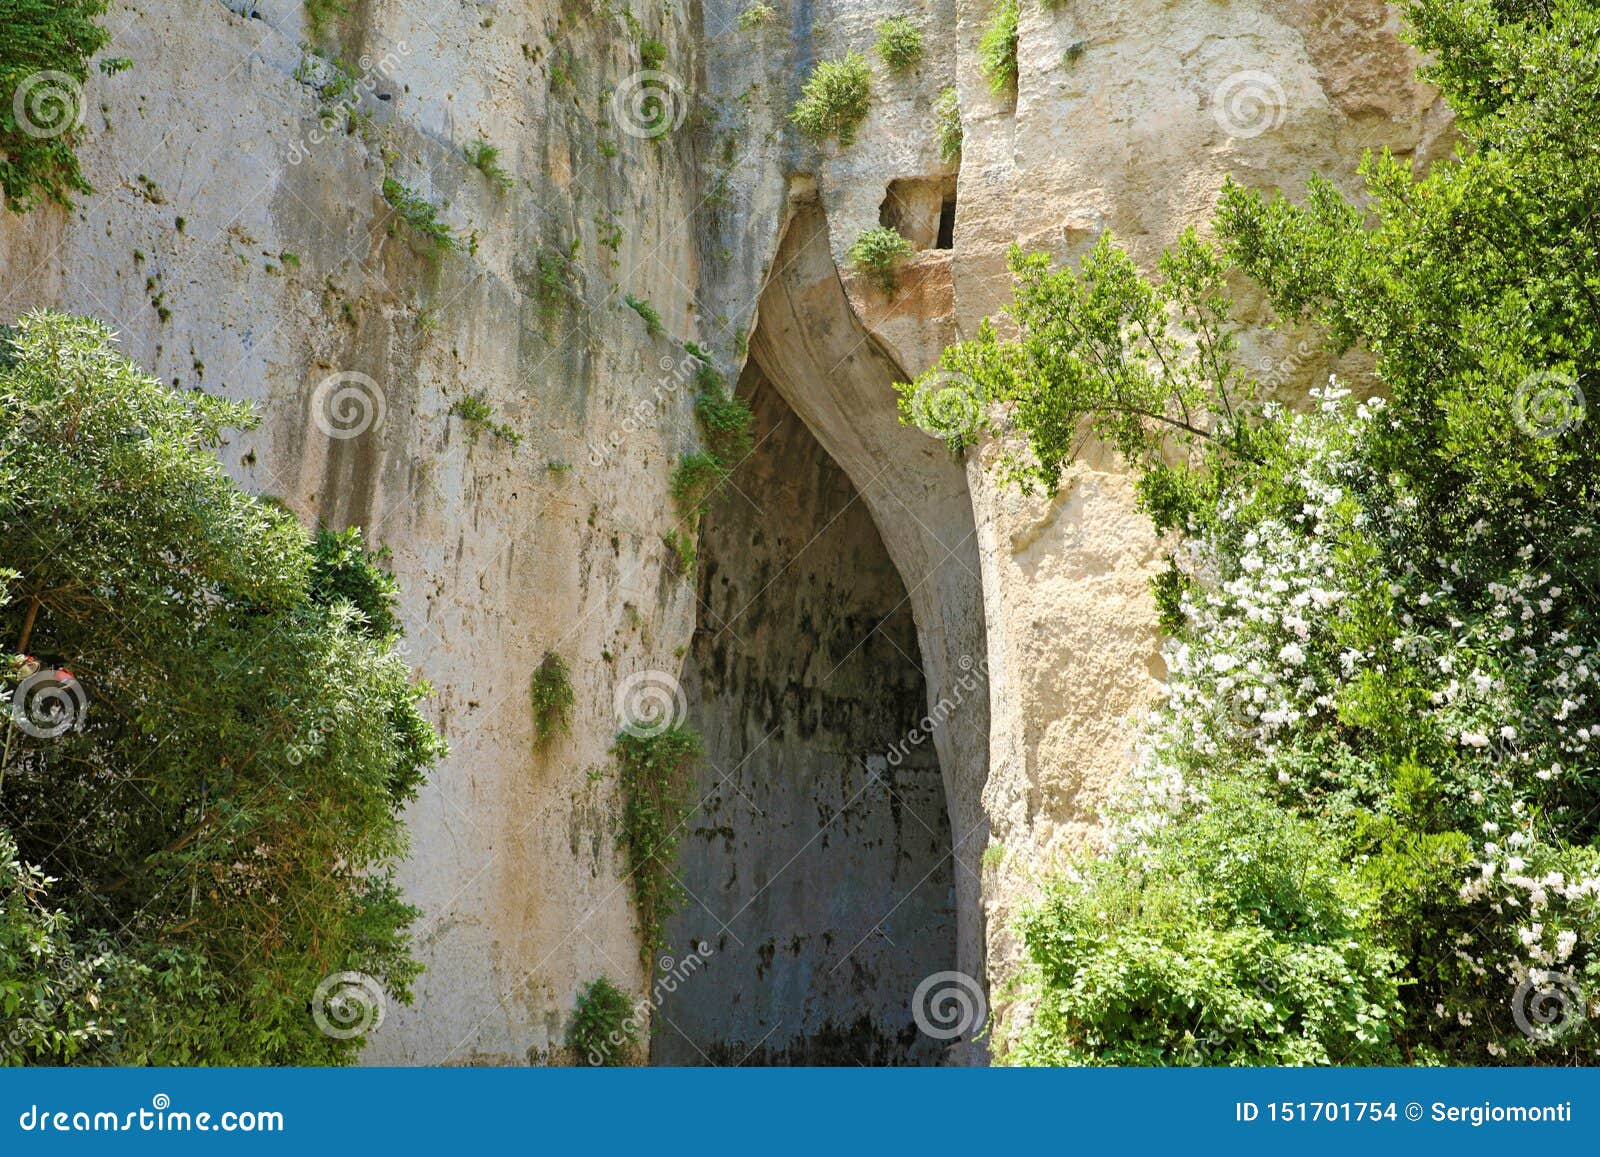 limestone cave ear of dionysius orecchio di dionisio a cave with acoustics effects inside, syracuse siracusa, sicily, italy